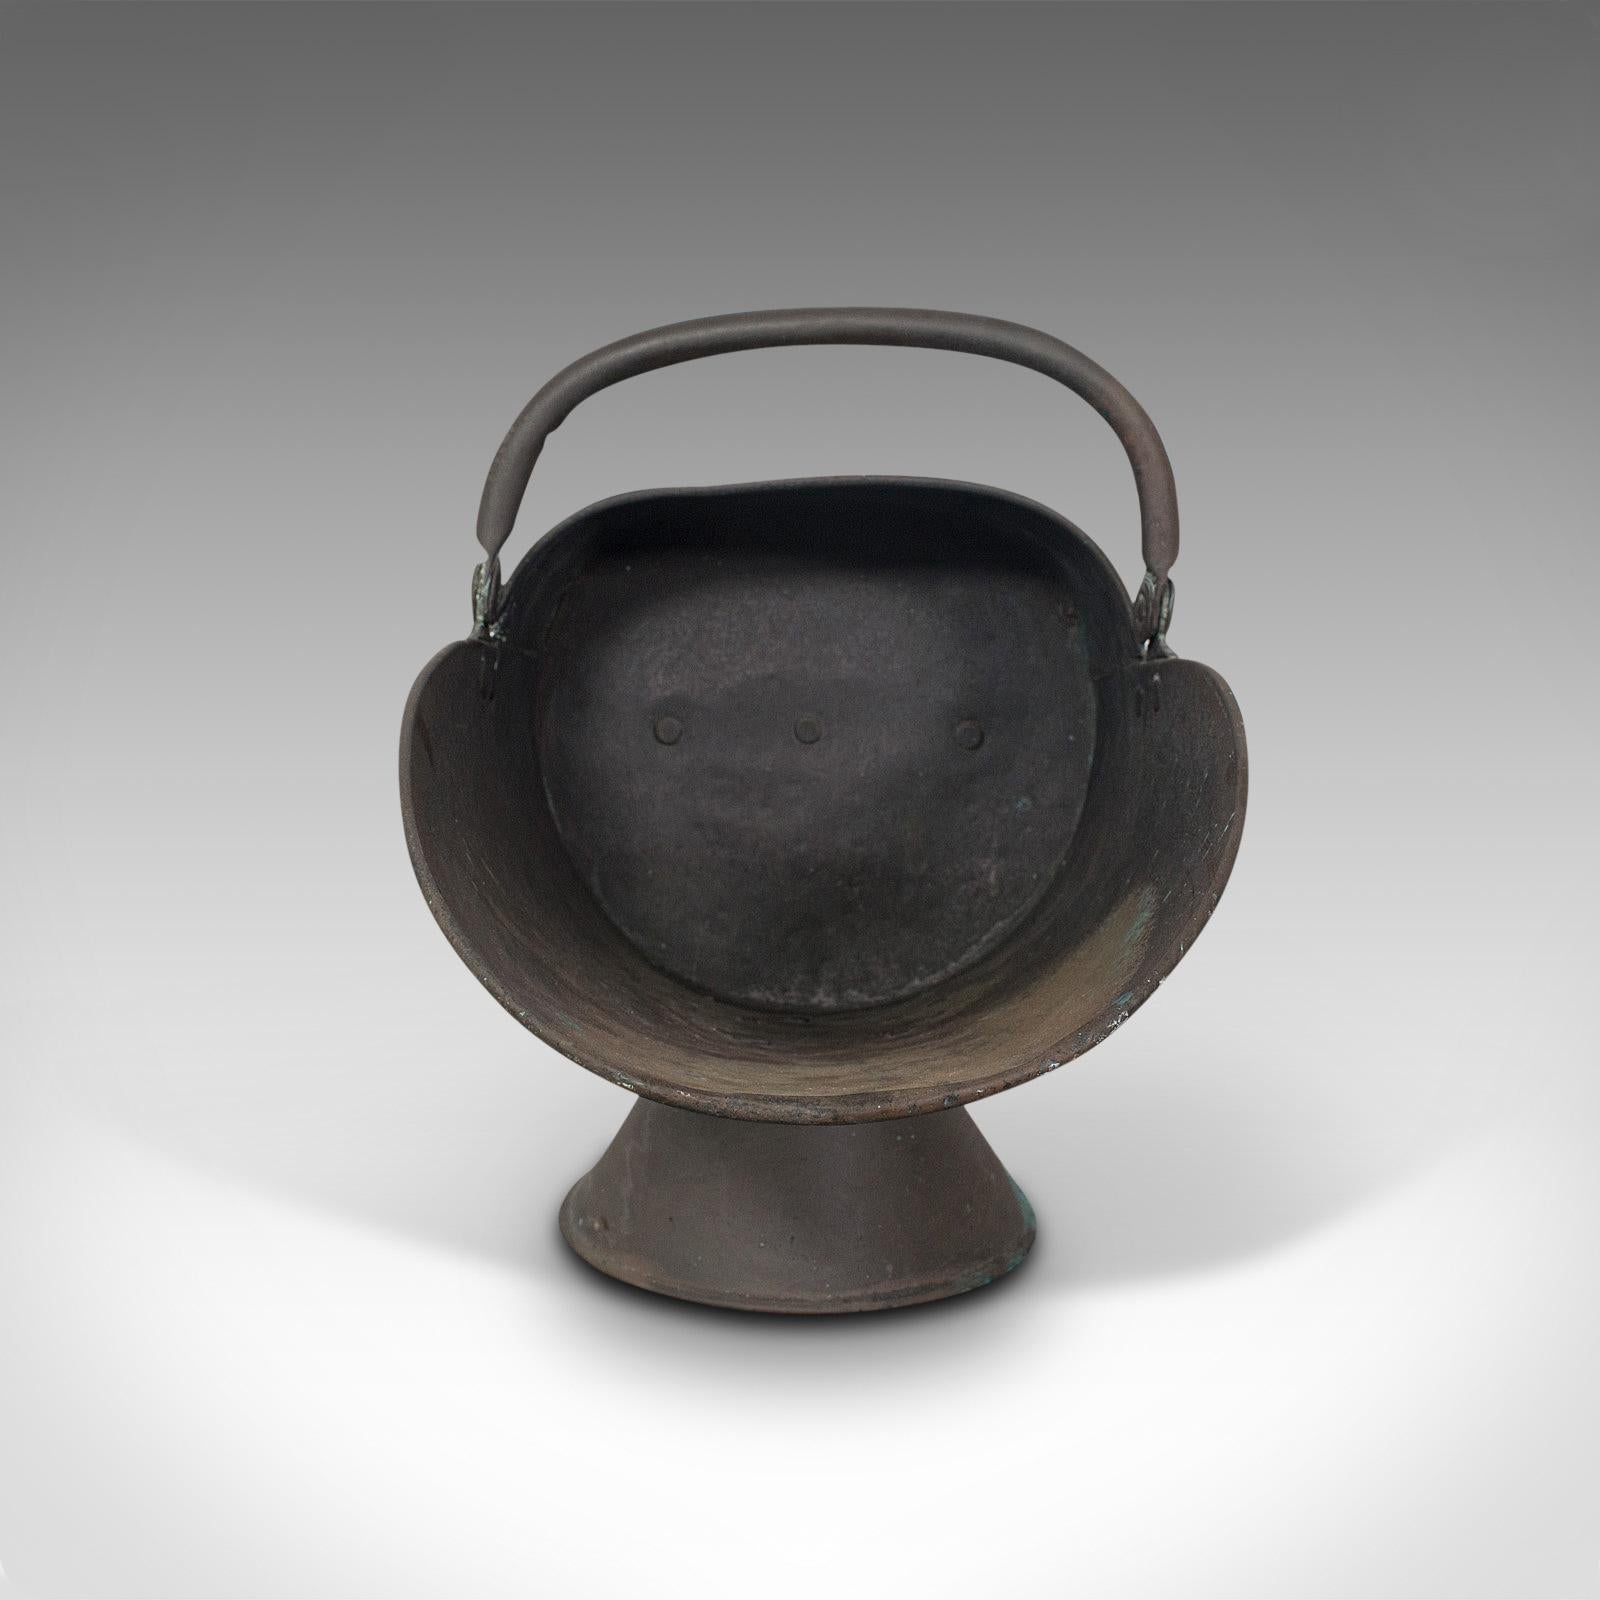 This is an antique helmet scuttle. An English, copper fireside coal or log bucket, dating to the Victorian period, circa 1870.

Attractive fireside helmet scuttle
Displays a desirable aged patina, pleasingly unpolished
Deliciously patinated